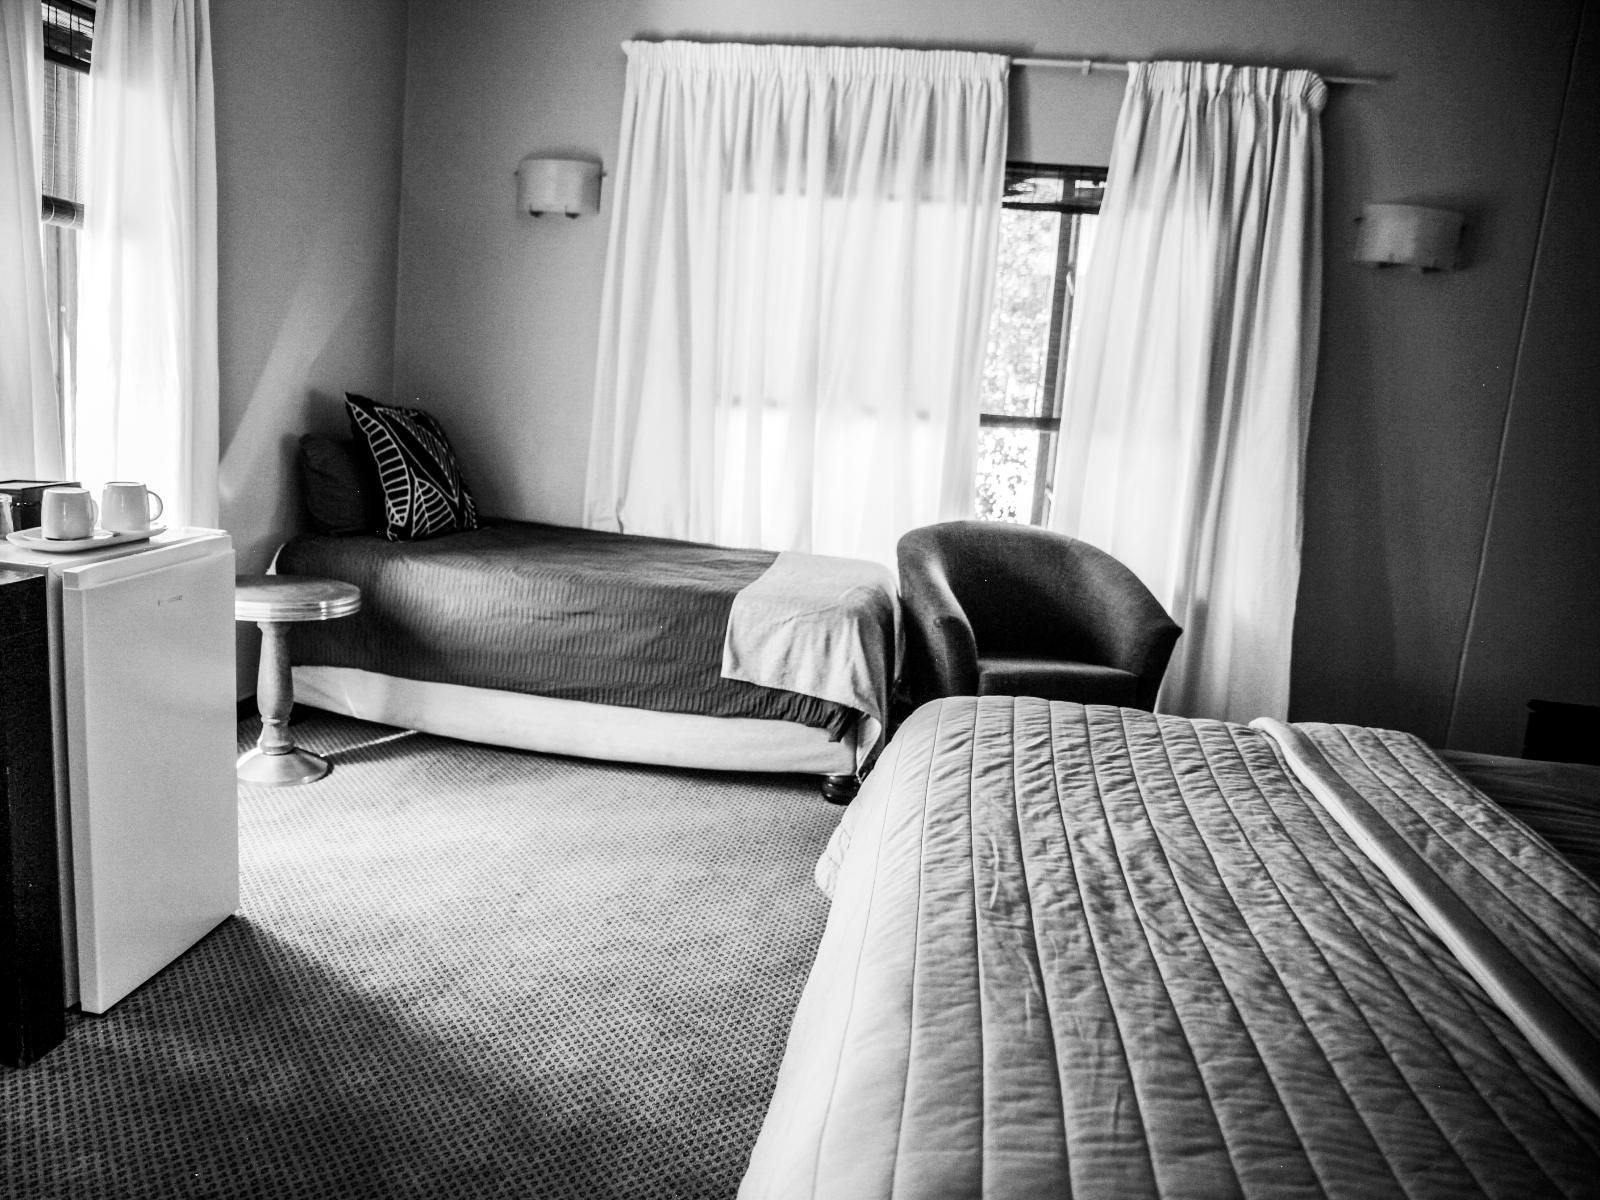 Komodo Guesthouse Rustenburg North West Province South Africa Colorless, Black And White, Bedroom